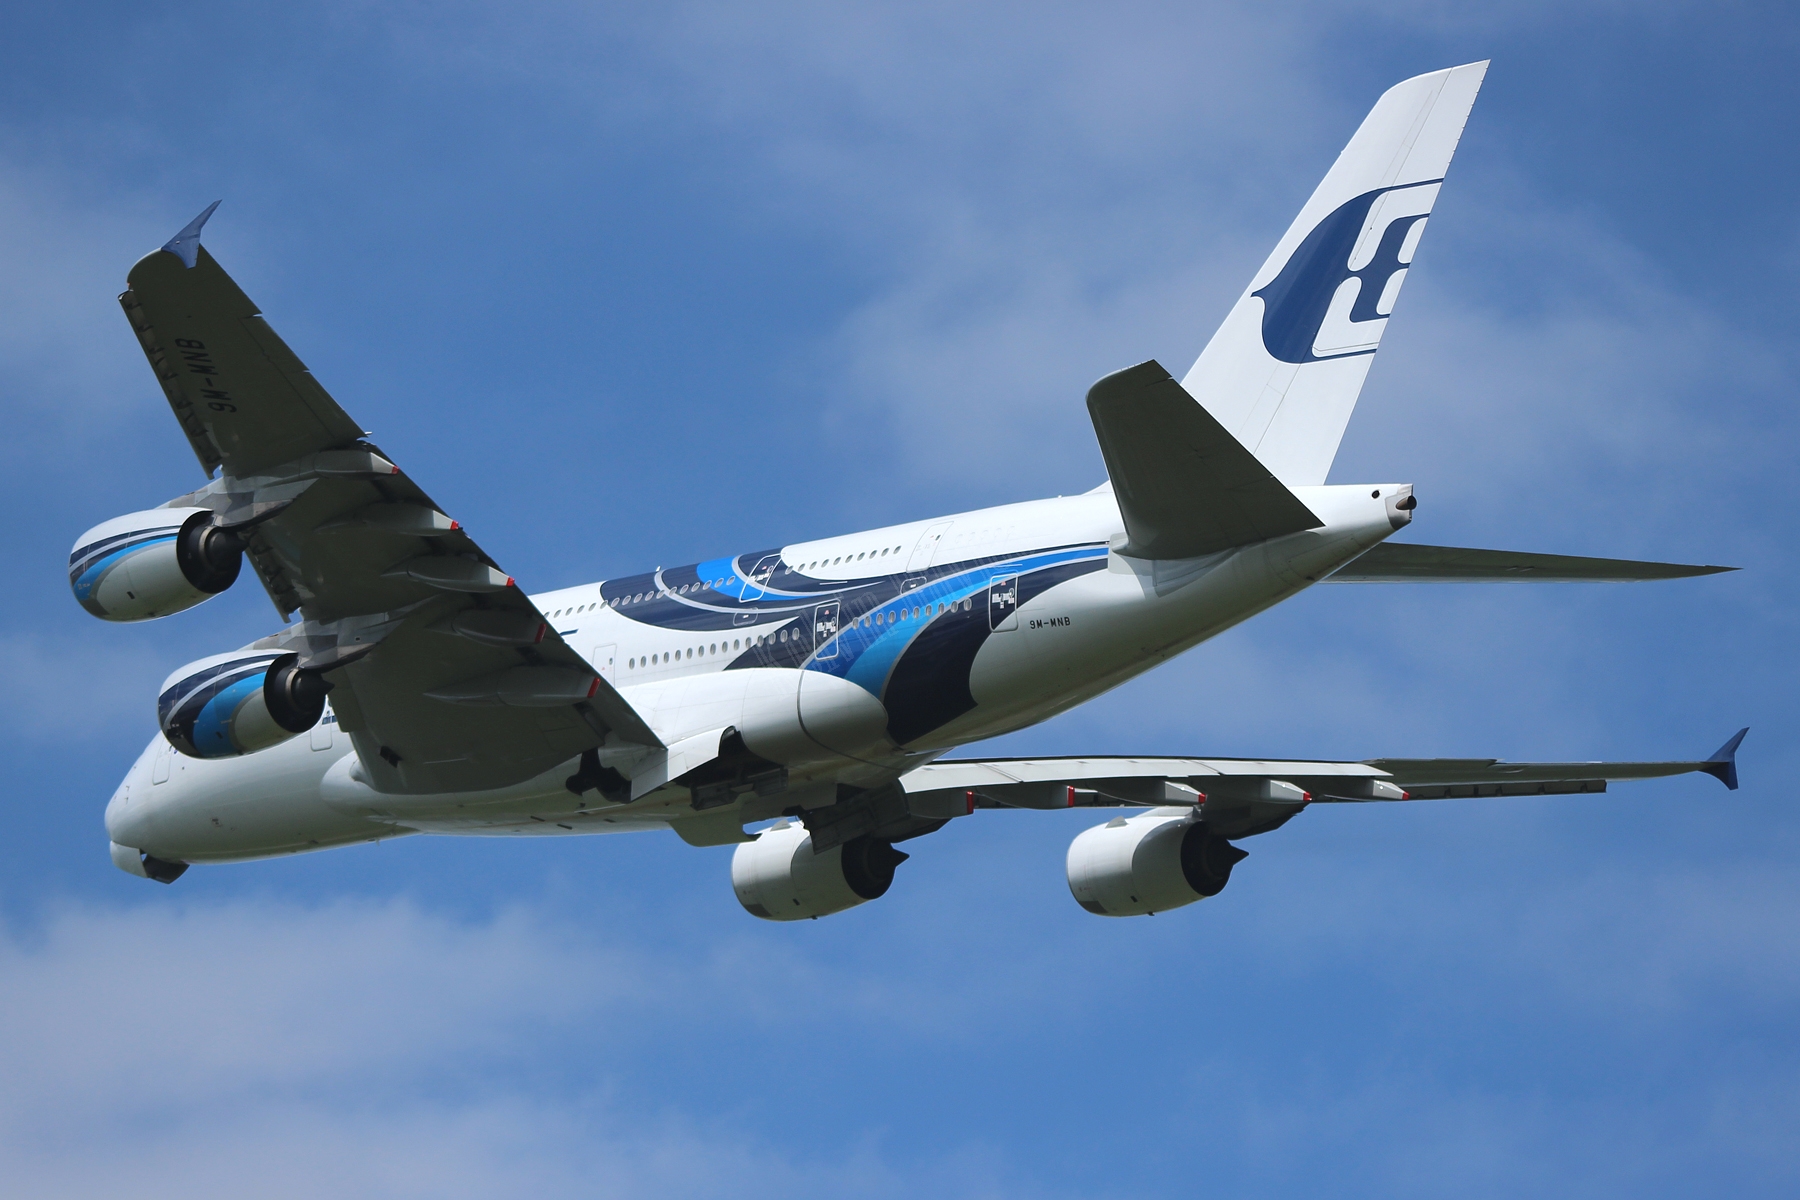 Malaysia Airlines A380 9M-MNB